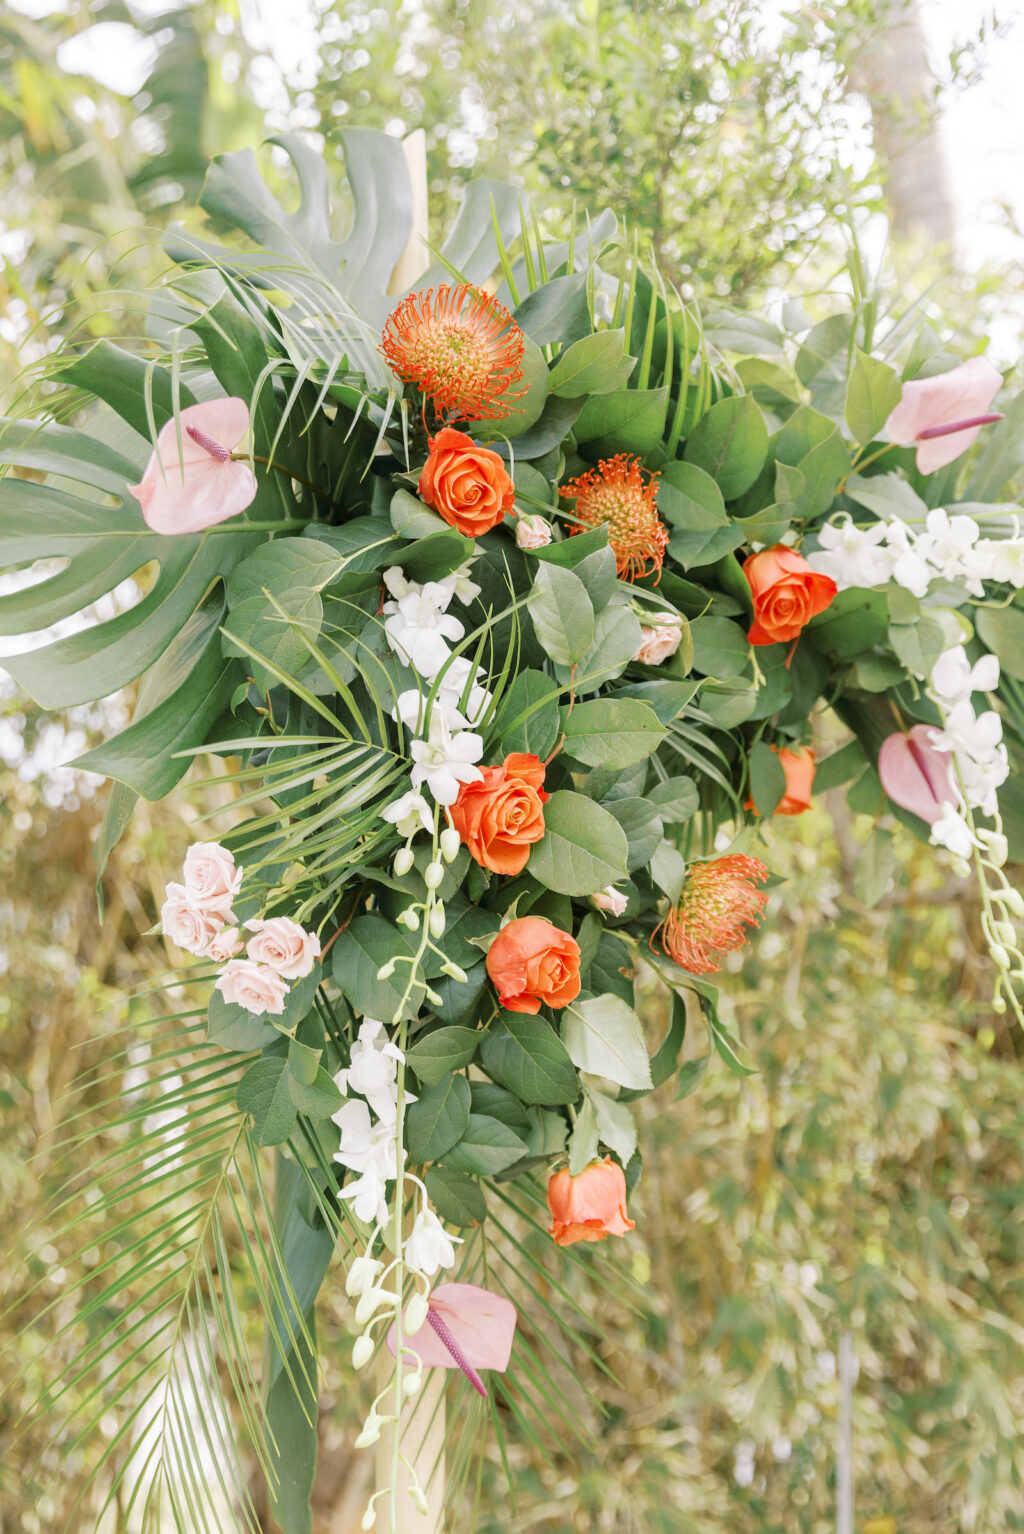 Tropical Pink and Green Wedding Ceremony Decor, Bamboo Arch with Monstera and Palm Fronds, Orange Roses, Pin Cushion Protea, Pink Anthurium, White Hanging Orchids | Tampa Bay Wedding Planner Coastal Coordinating